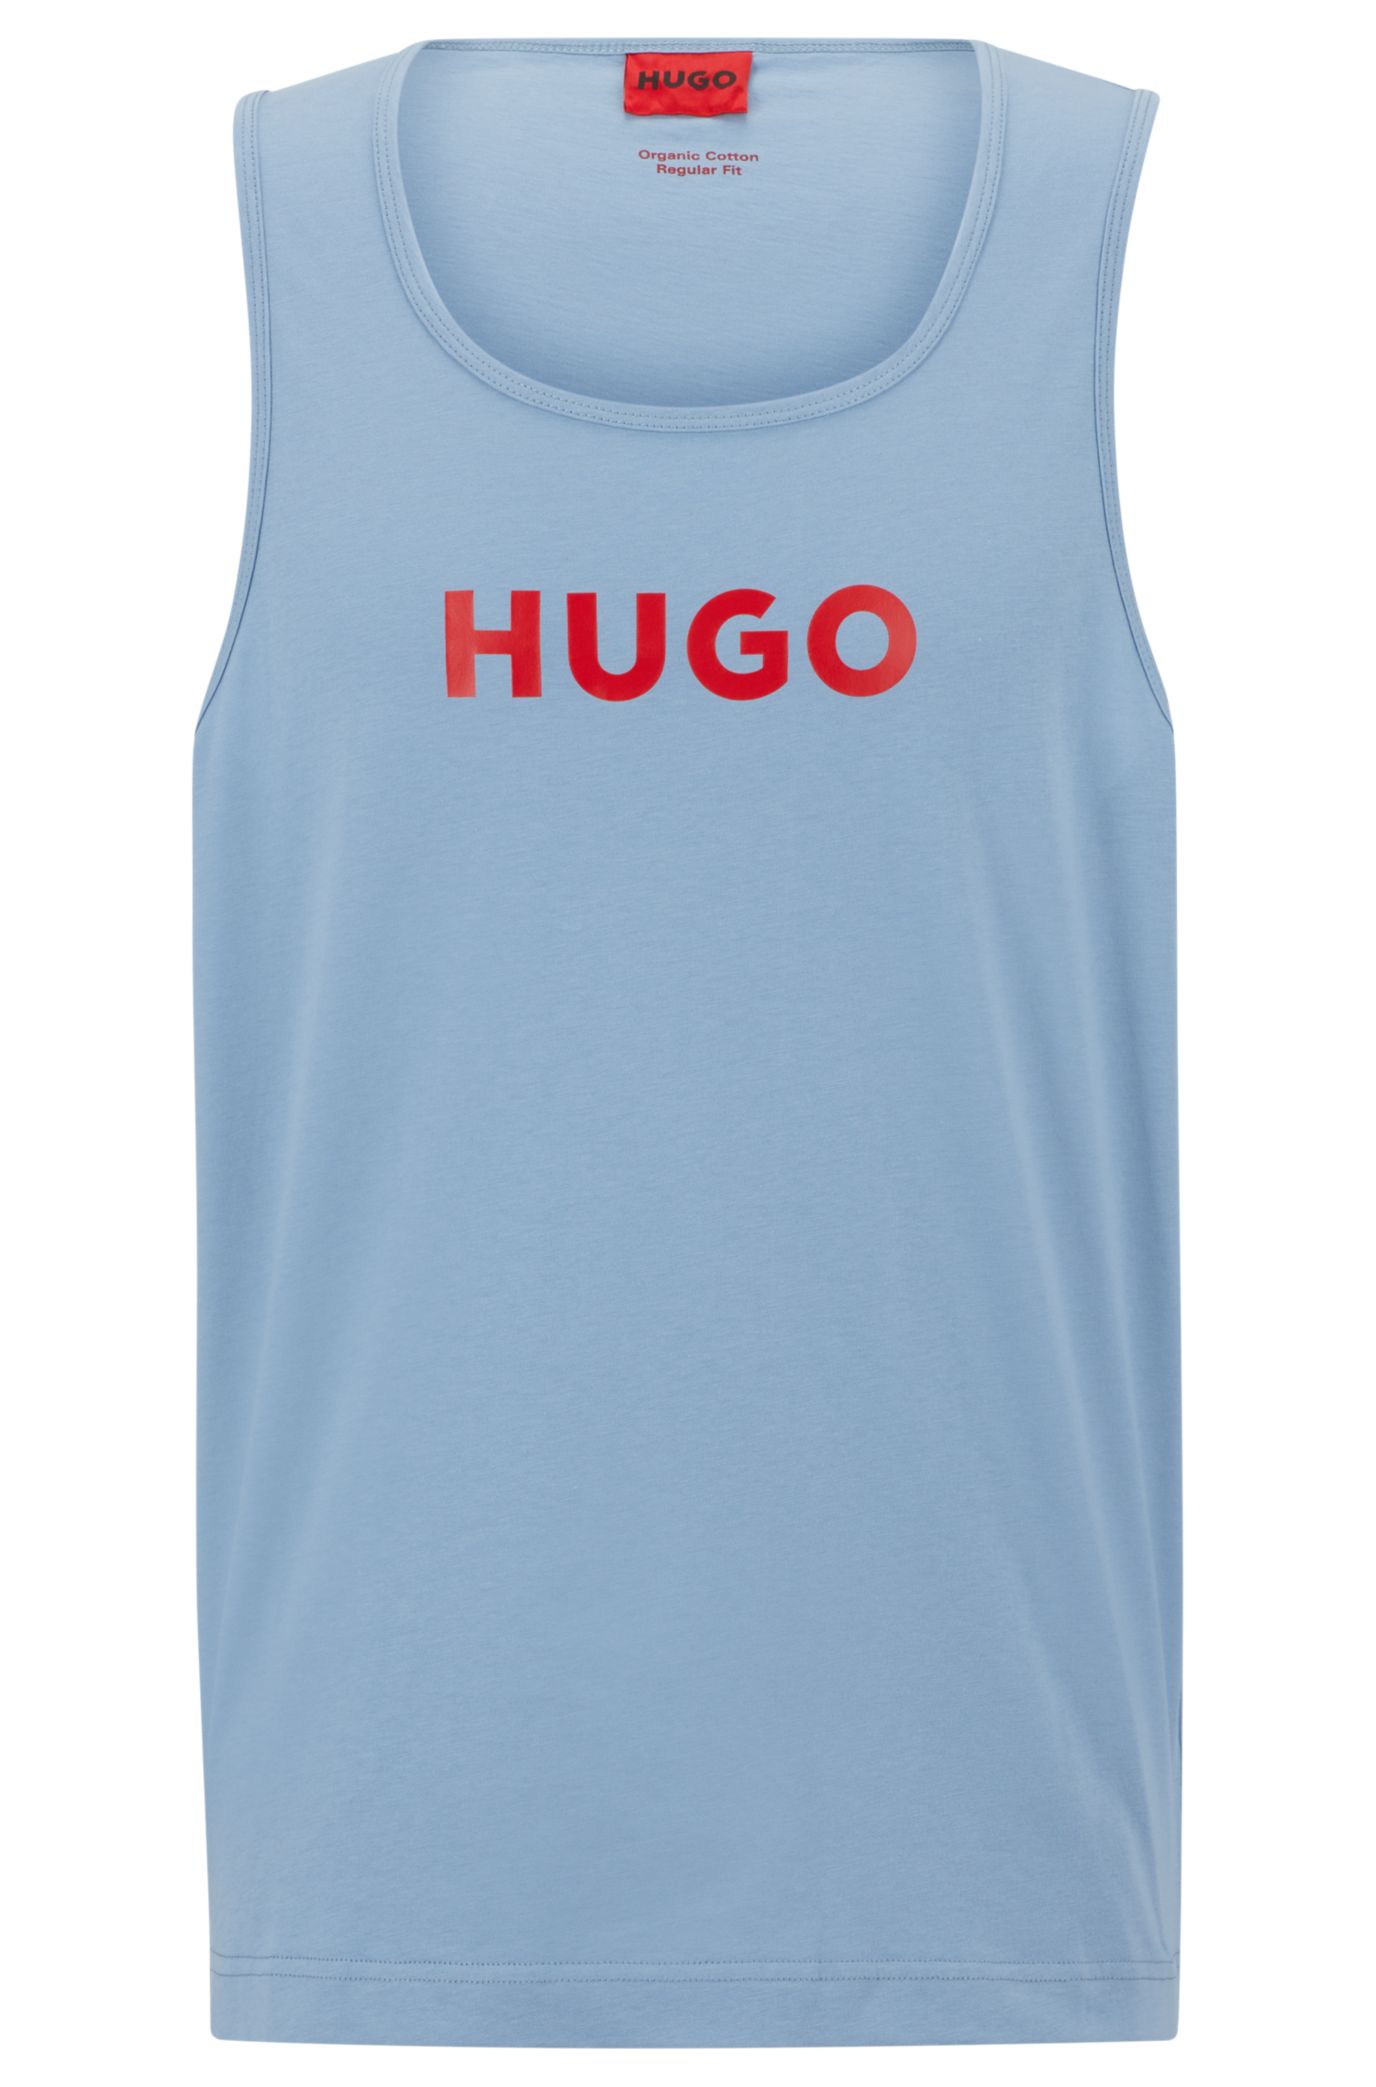 HUGO - red with Cotton tank logo top